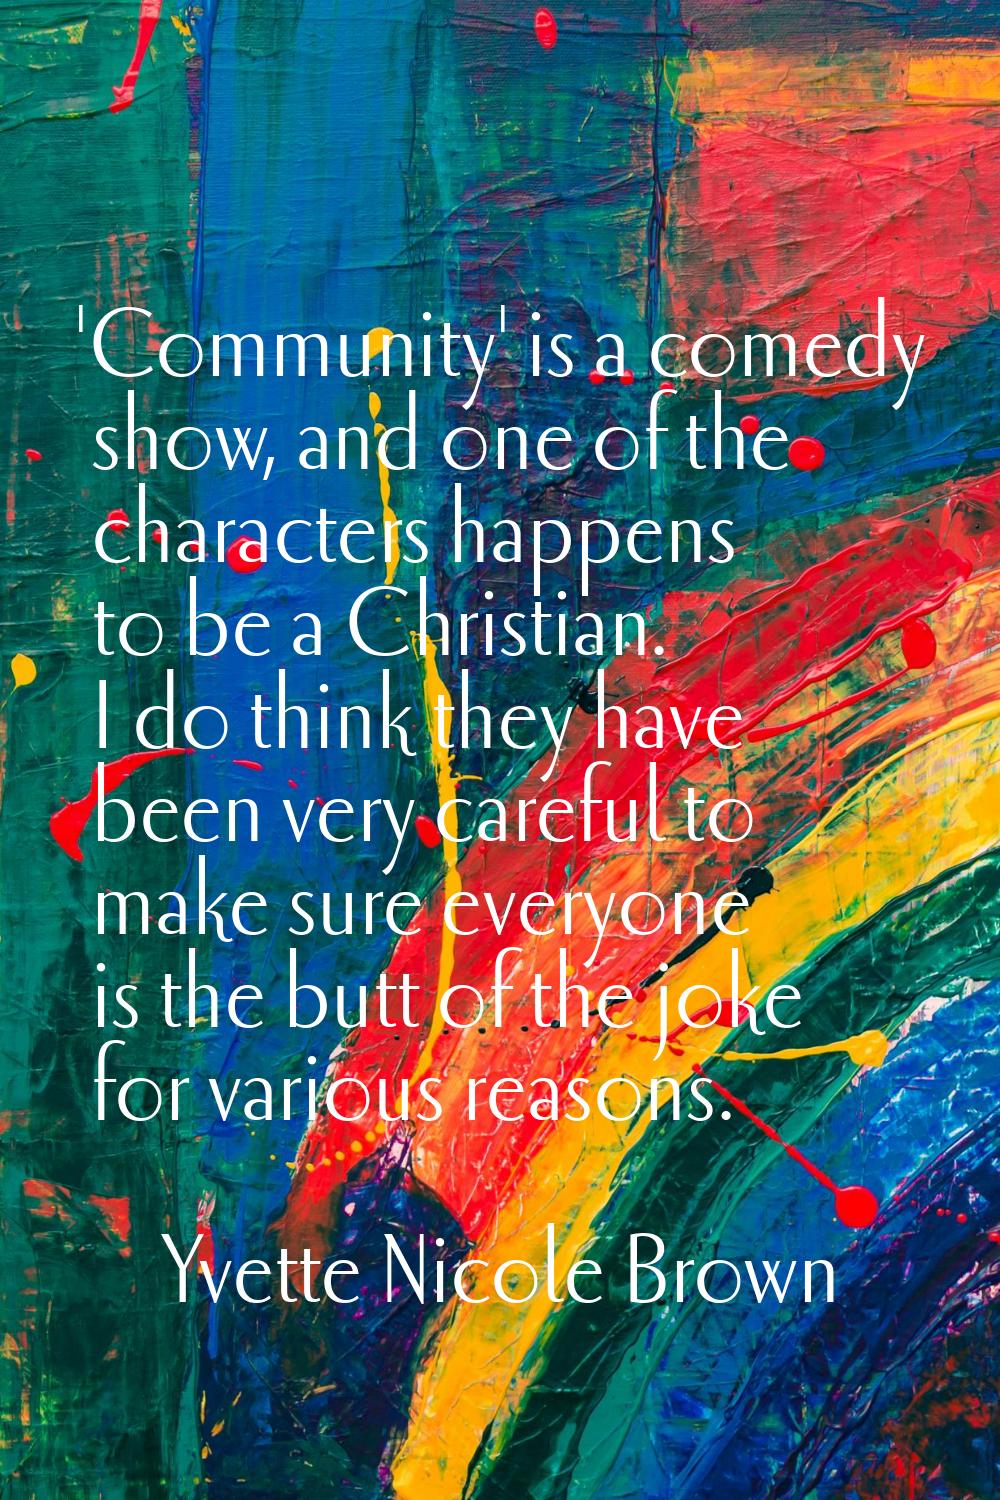 'Community' is a comedy show, and one of the characters happens to be a Christian. I do think they 